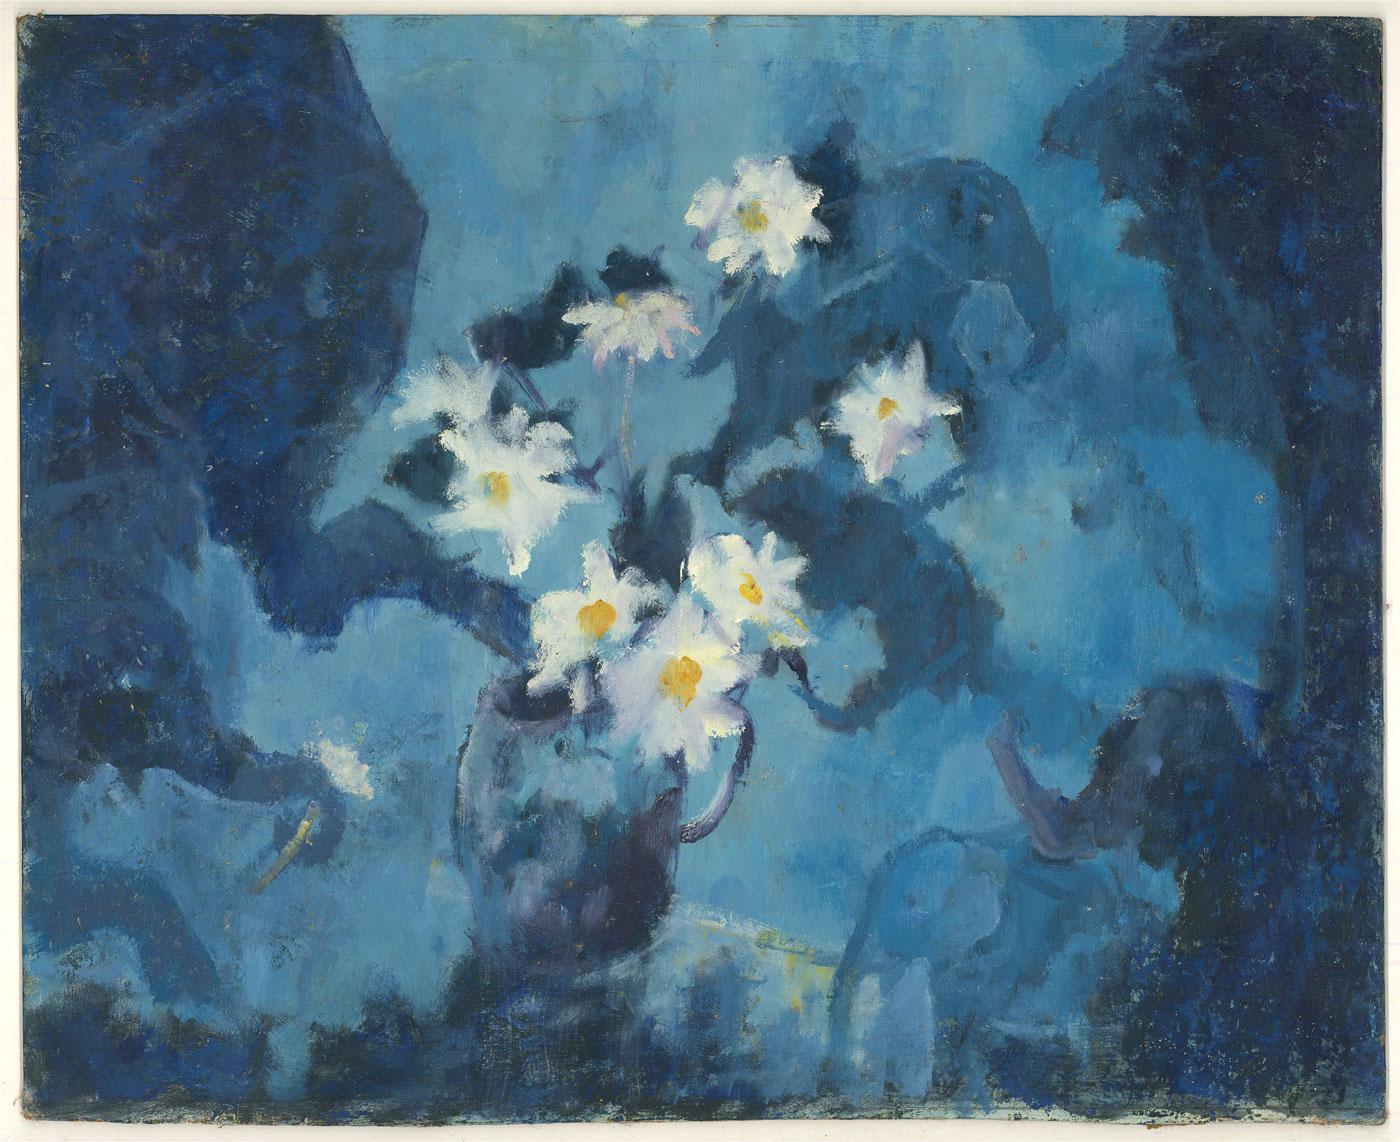 An unusual mix of floral still life and surrealist imagery in oil. A vase of daisies are surrounded by floating silhouettes of blue elephants who are plucking the daisies out of the vase.

The painting is unsigned and presented on board.

On board.